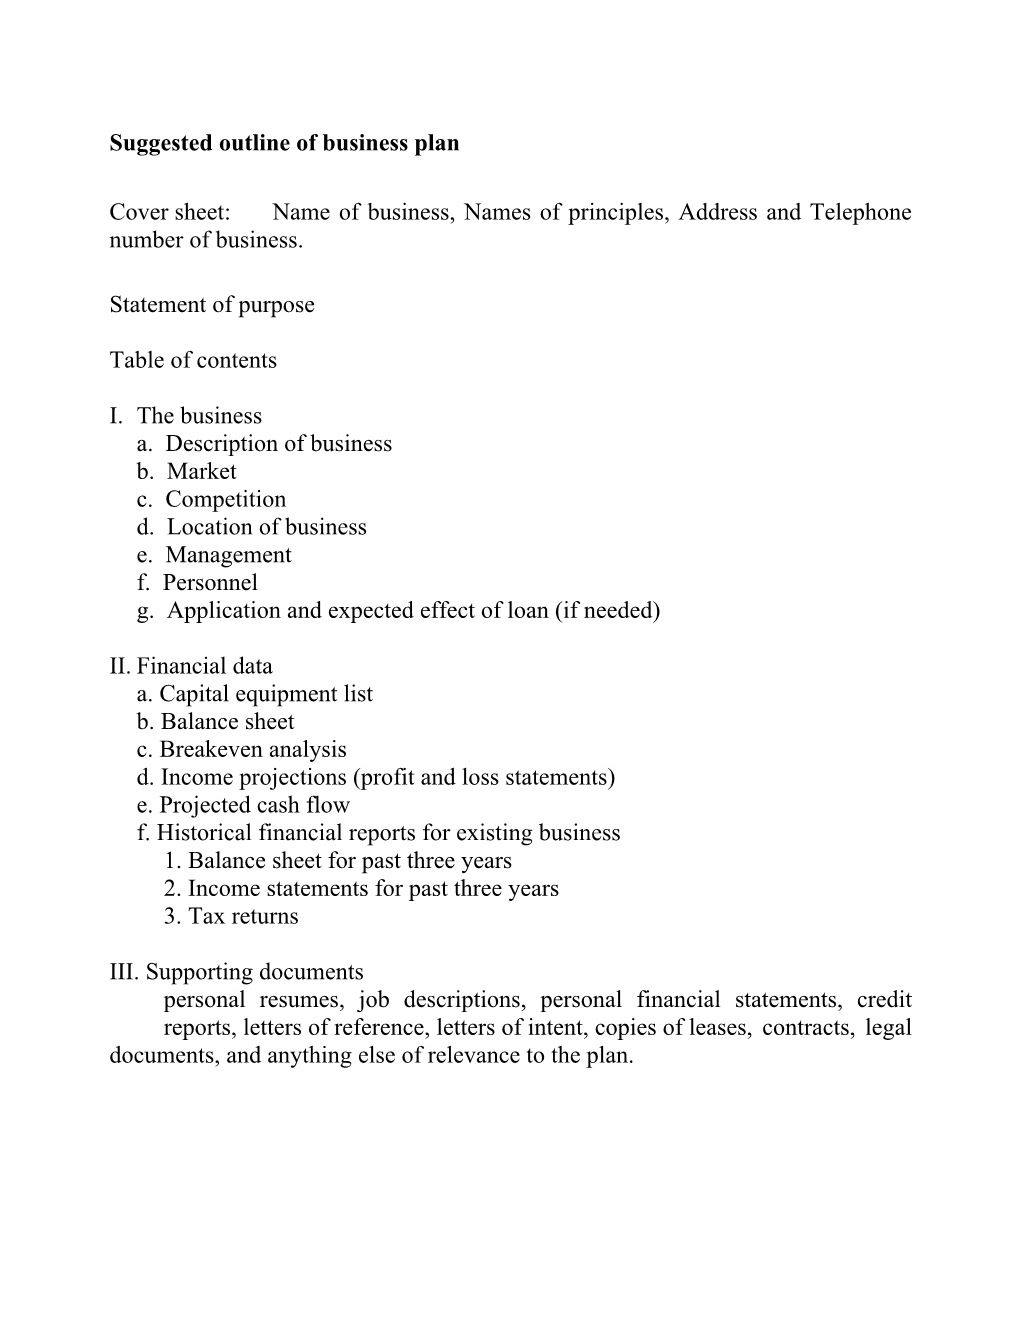 Suggested Outline of Business Plan Cover Sheet